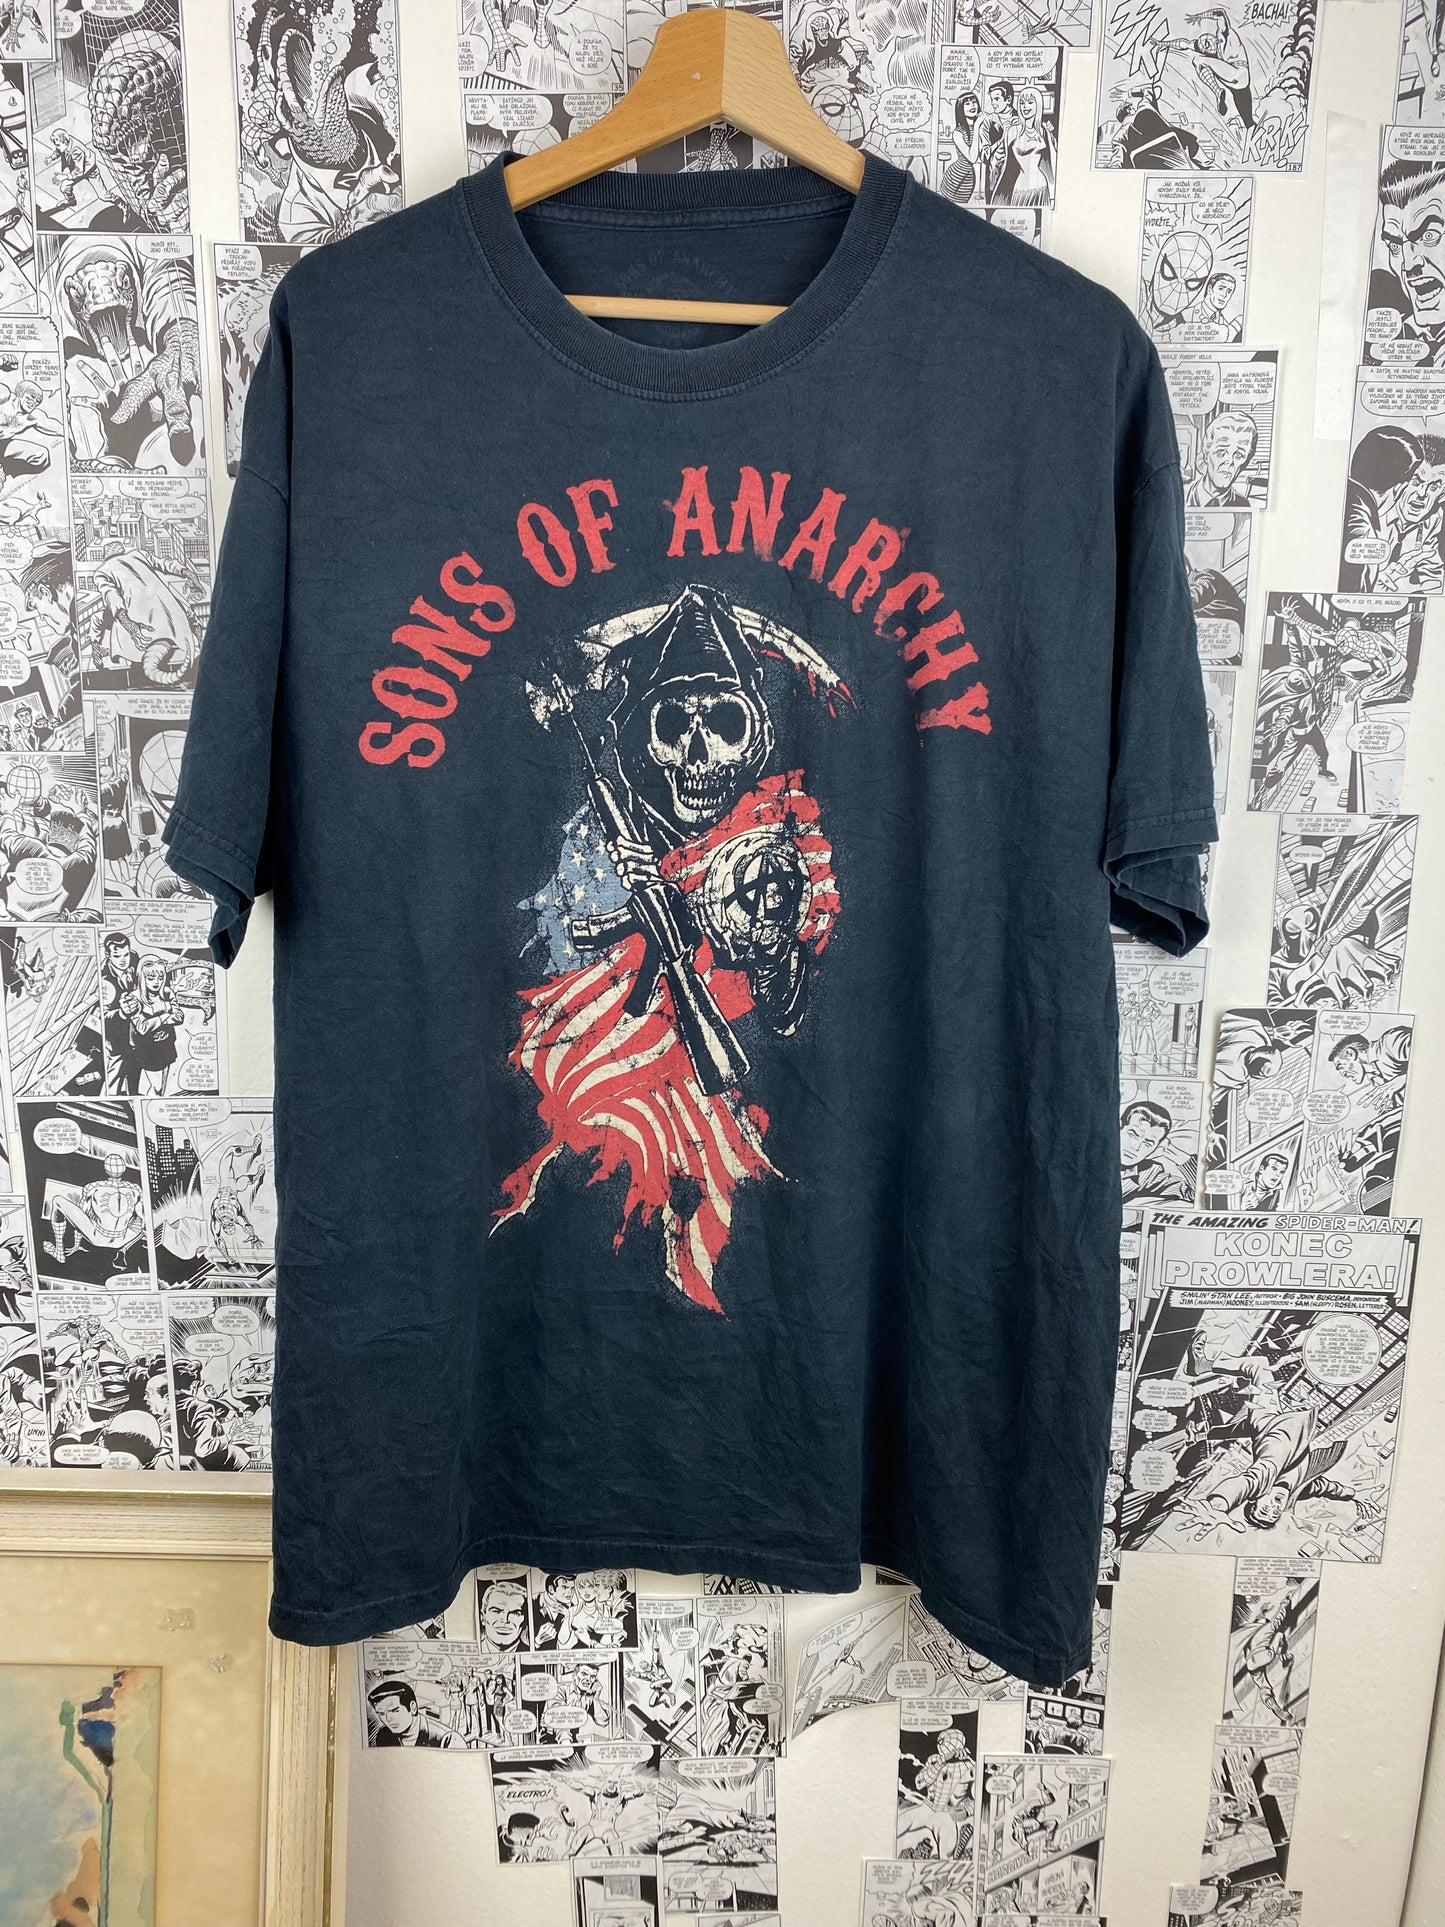 Sons of Anarchy t-shirt - size L